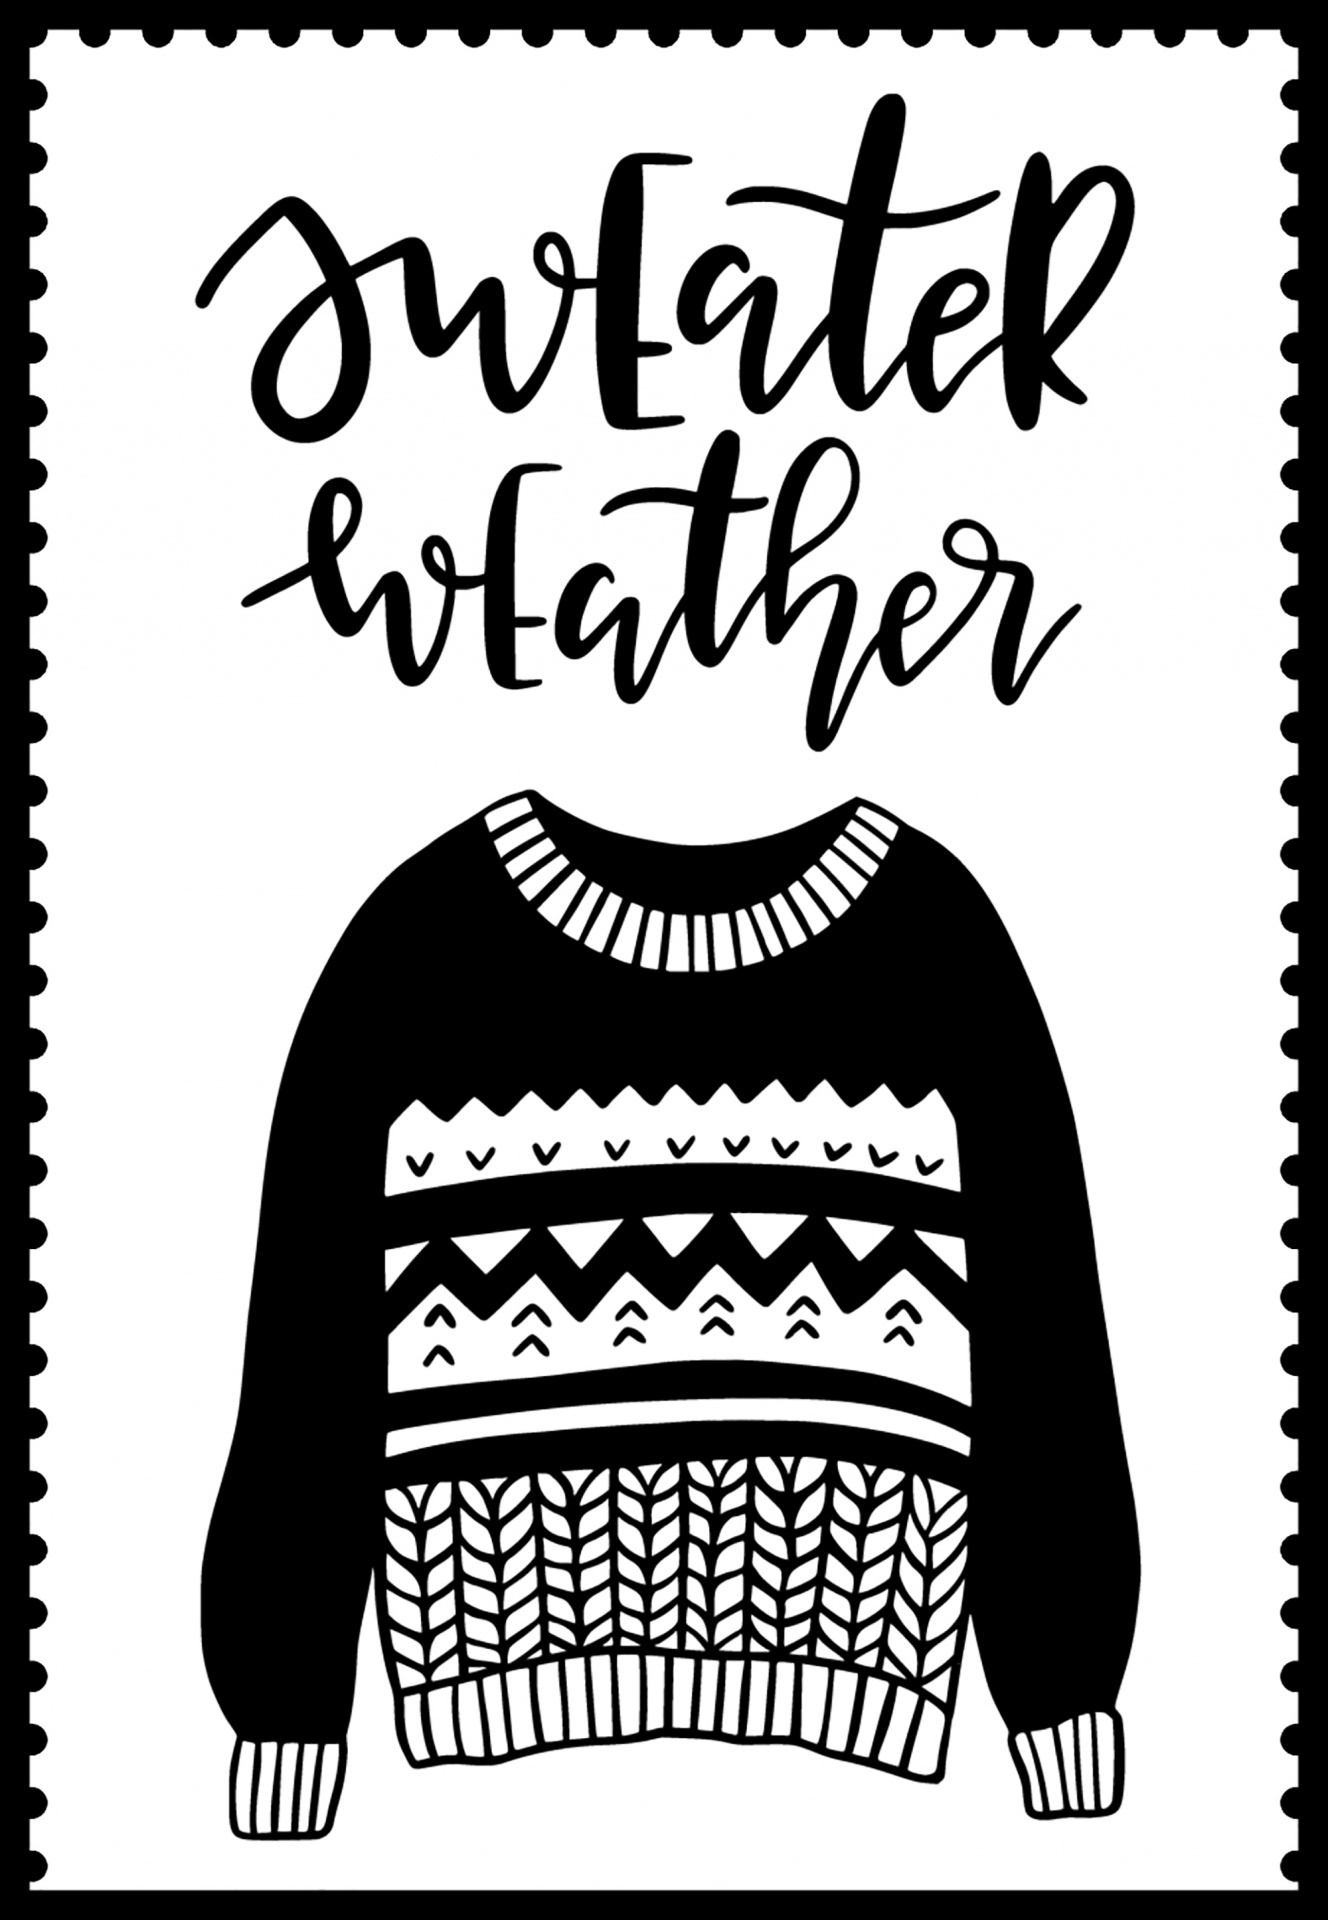 black and white illustration of a knitted sweater with words SWEATER WEATHER